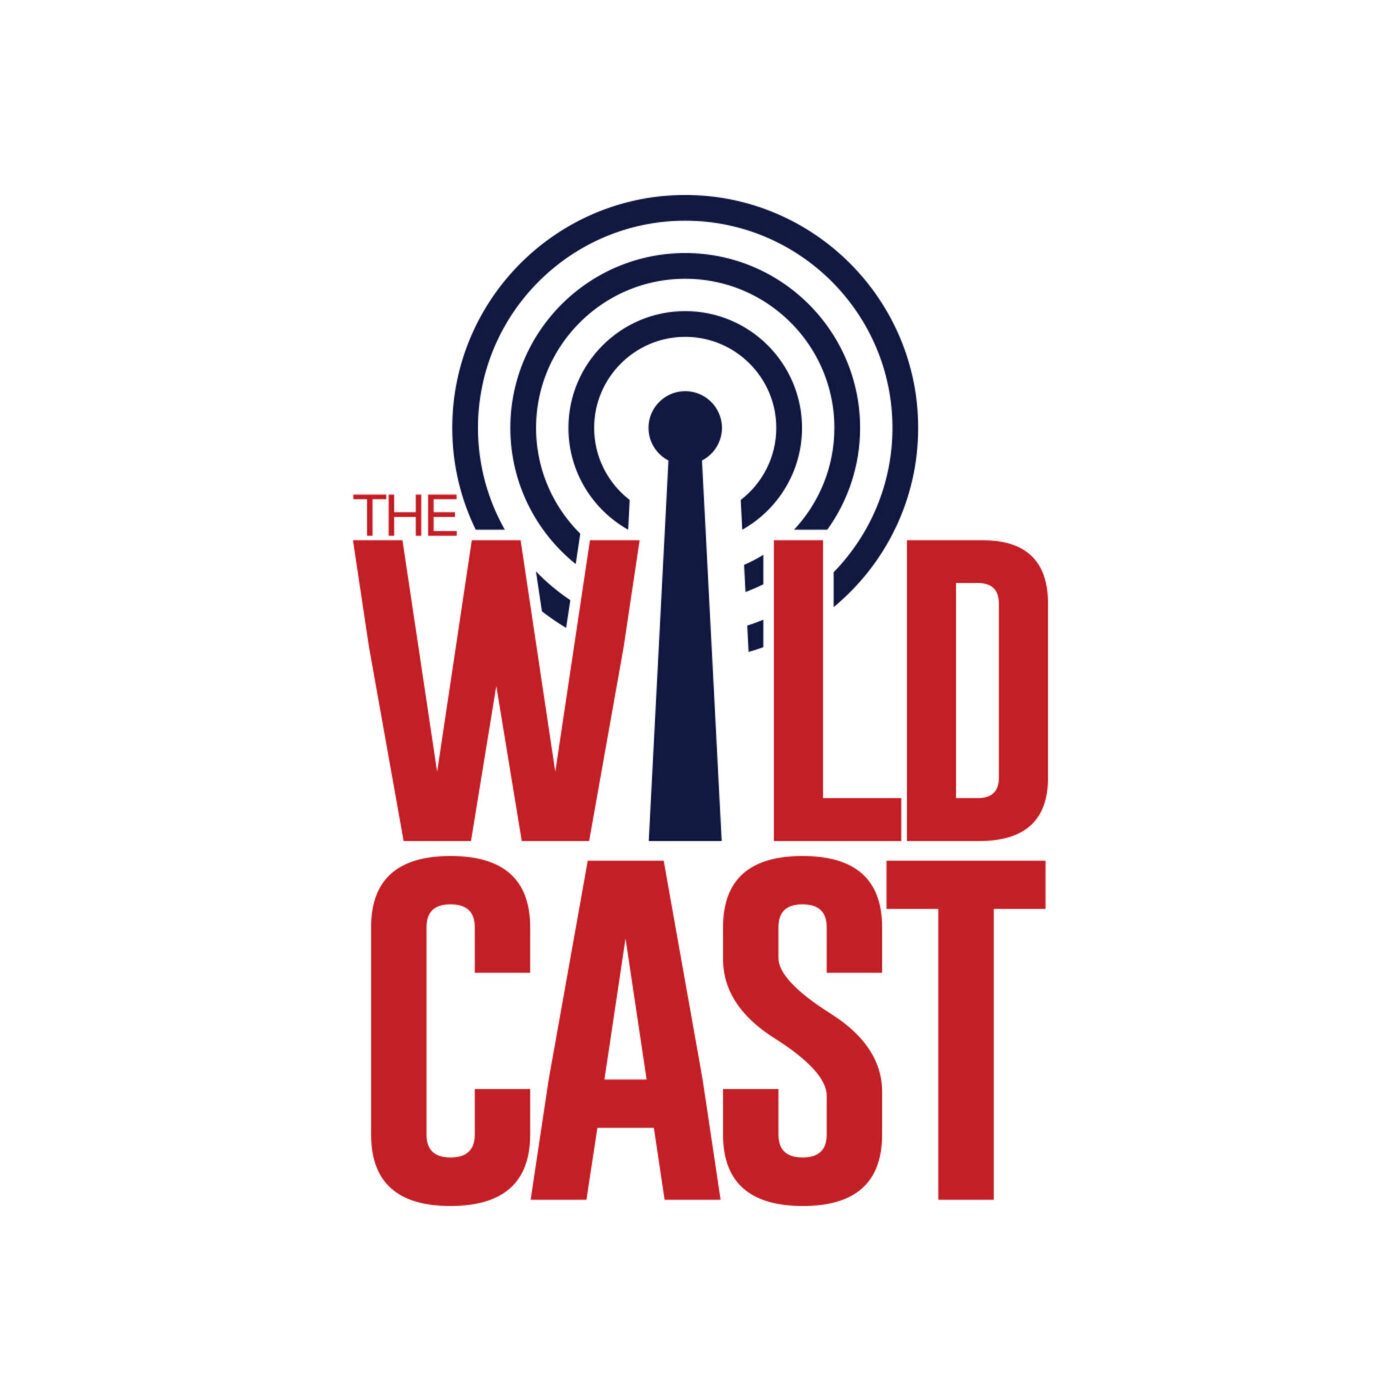 The Wildcast, Episode 410: Sports editor Ryan Finley bids farewell to Tucson